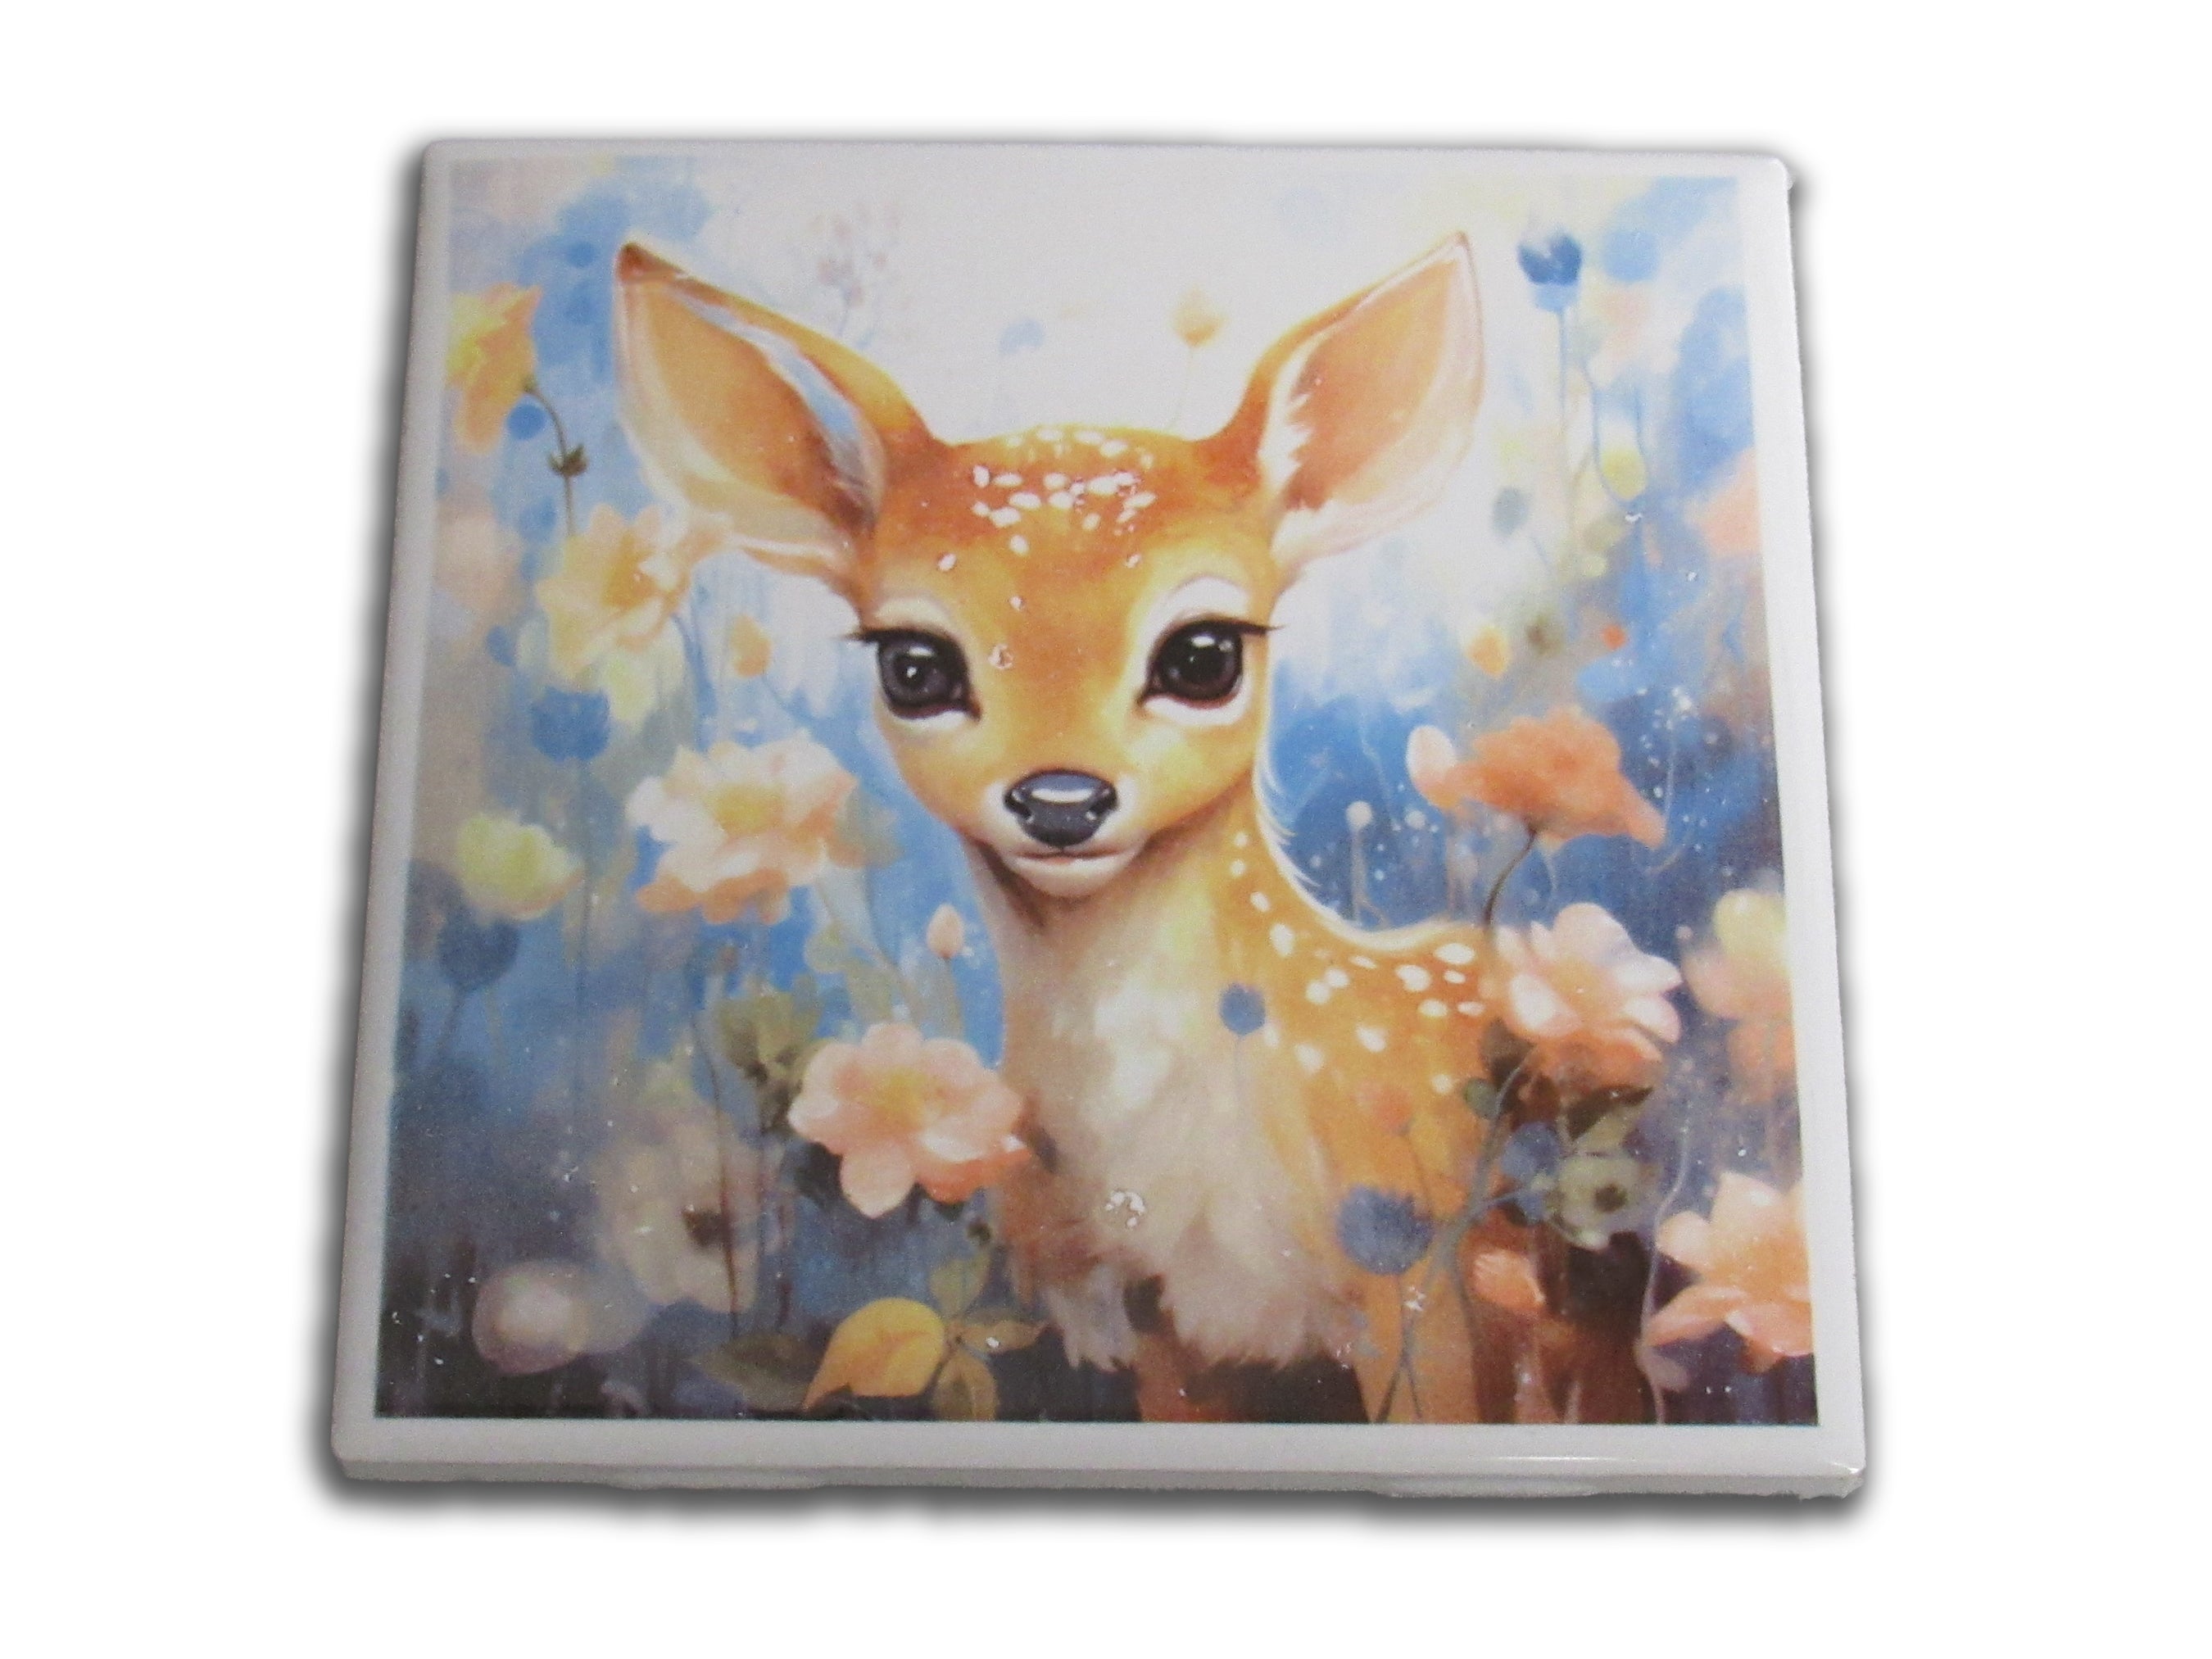 Cute Baby Deer Trivet Ceramic Deer Hot Pad a fawn with blue floral background Trivet - A Mayes Pottery